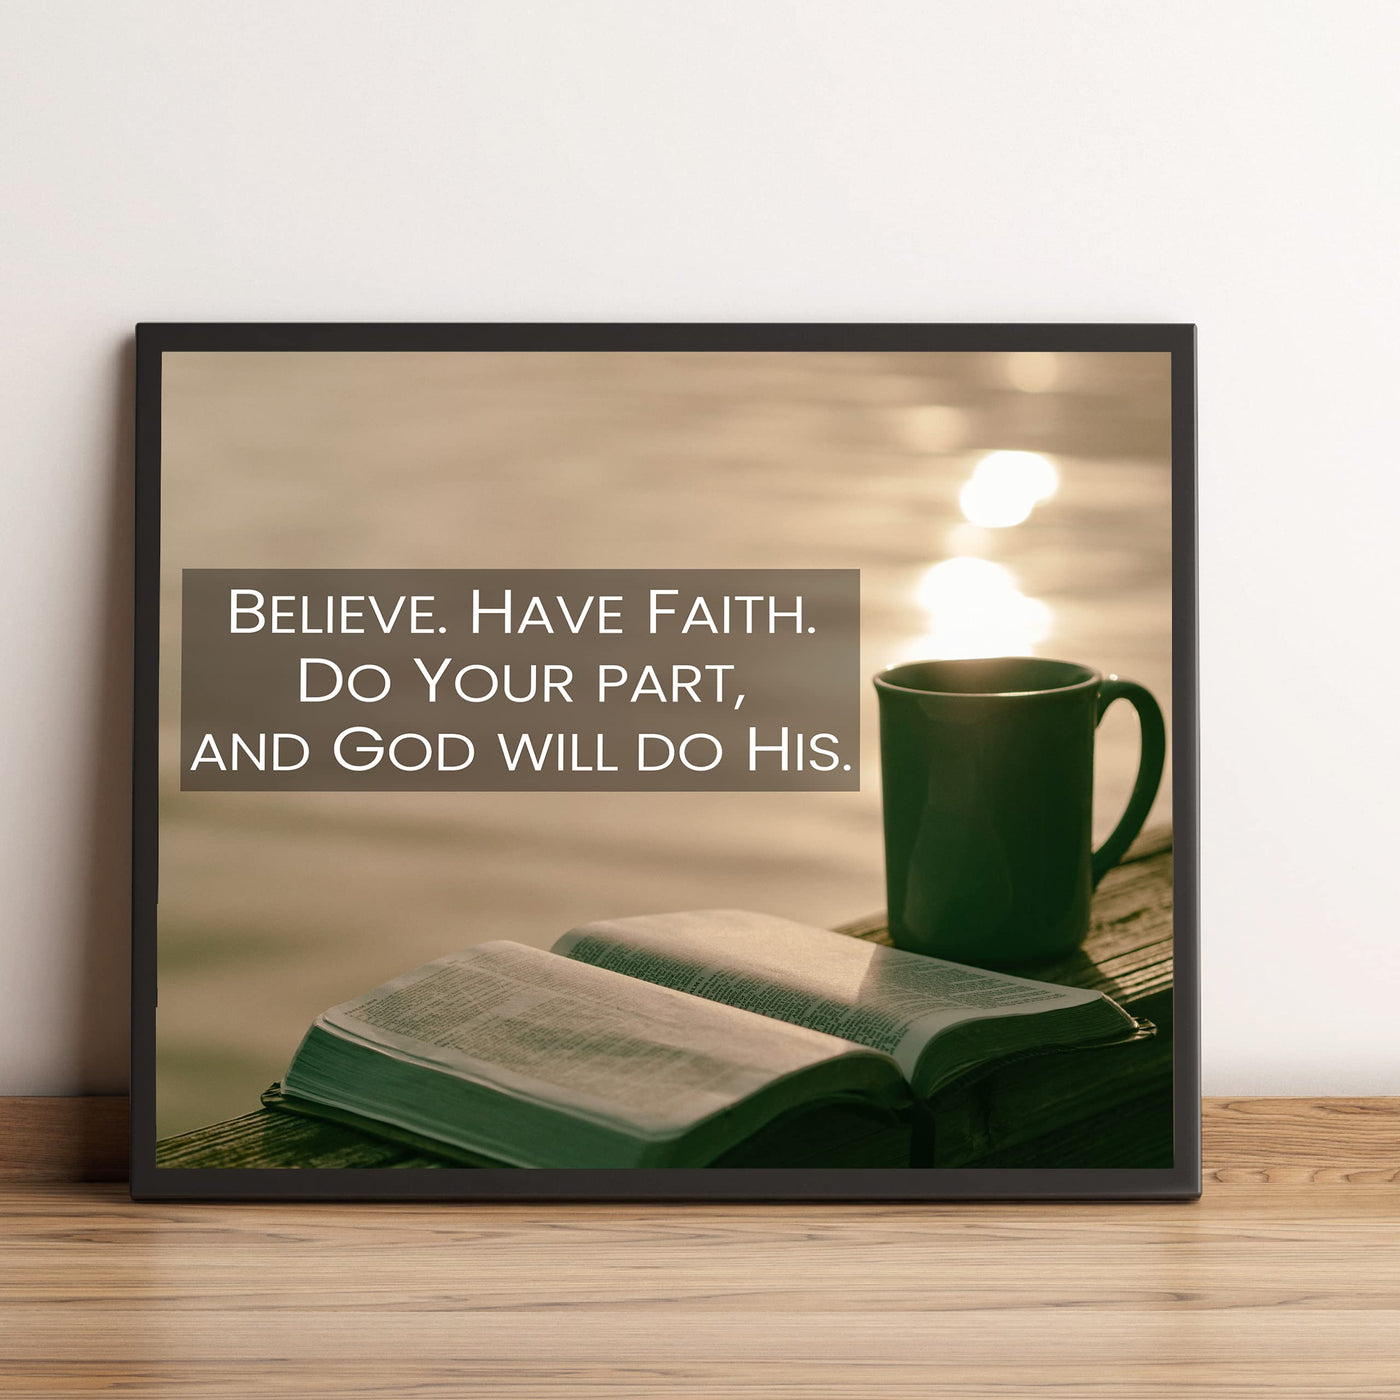 Believe-Have Faith-God Will Do His Part- Inspirational Christian Wall Art -10 x 8"- Bible Verse Photo Print w/Coffee Mug Image-Ready to Frame. Home-Office-Church Decor. Great Religious Gift!